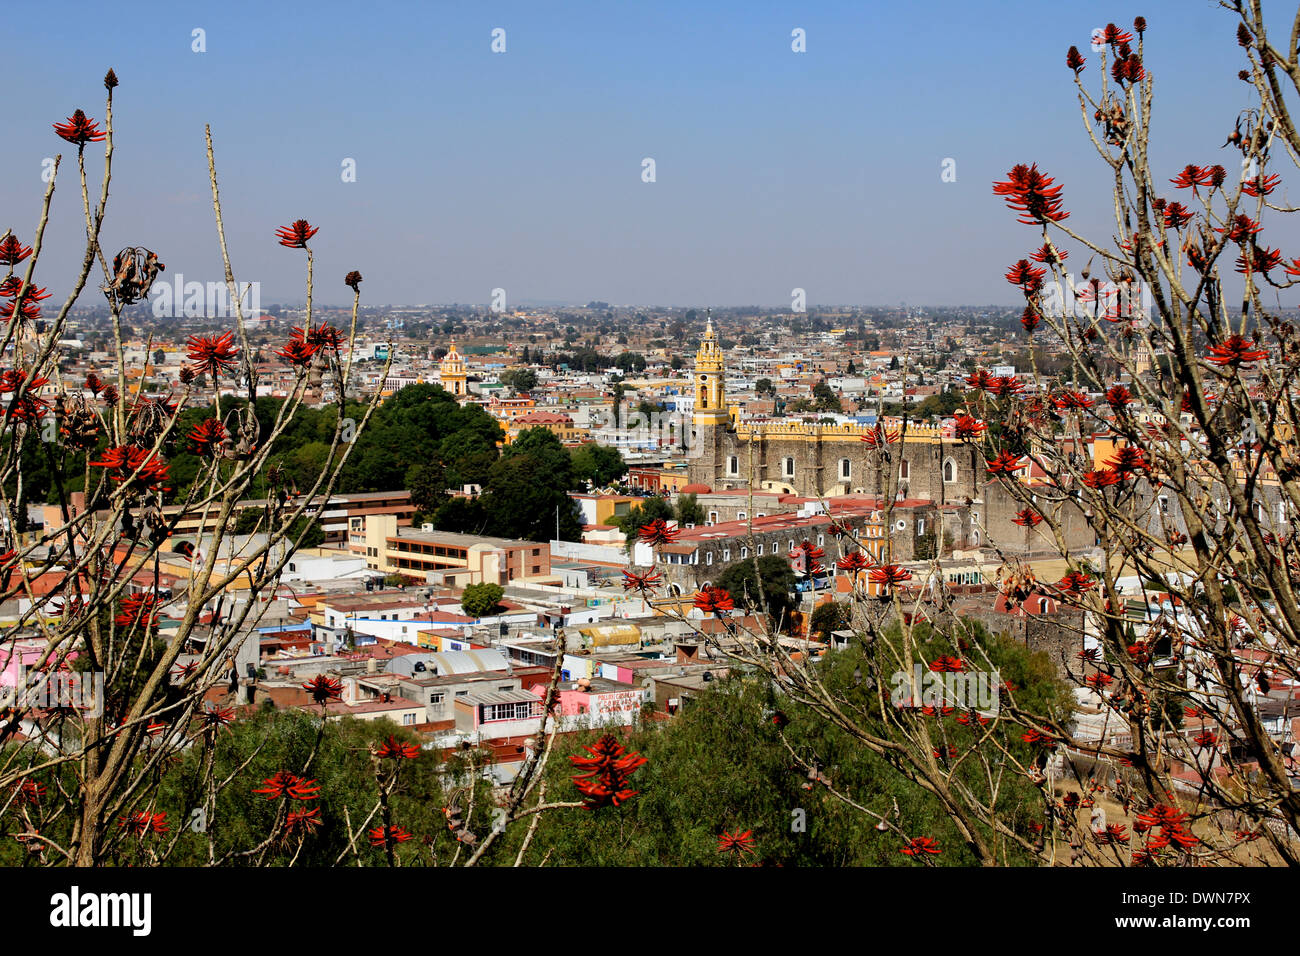 Looking down on the city of Cholula from the Great Pyramid, Puebla, Mexico Stock Photo